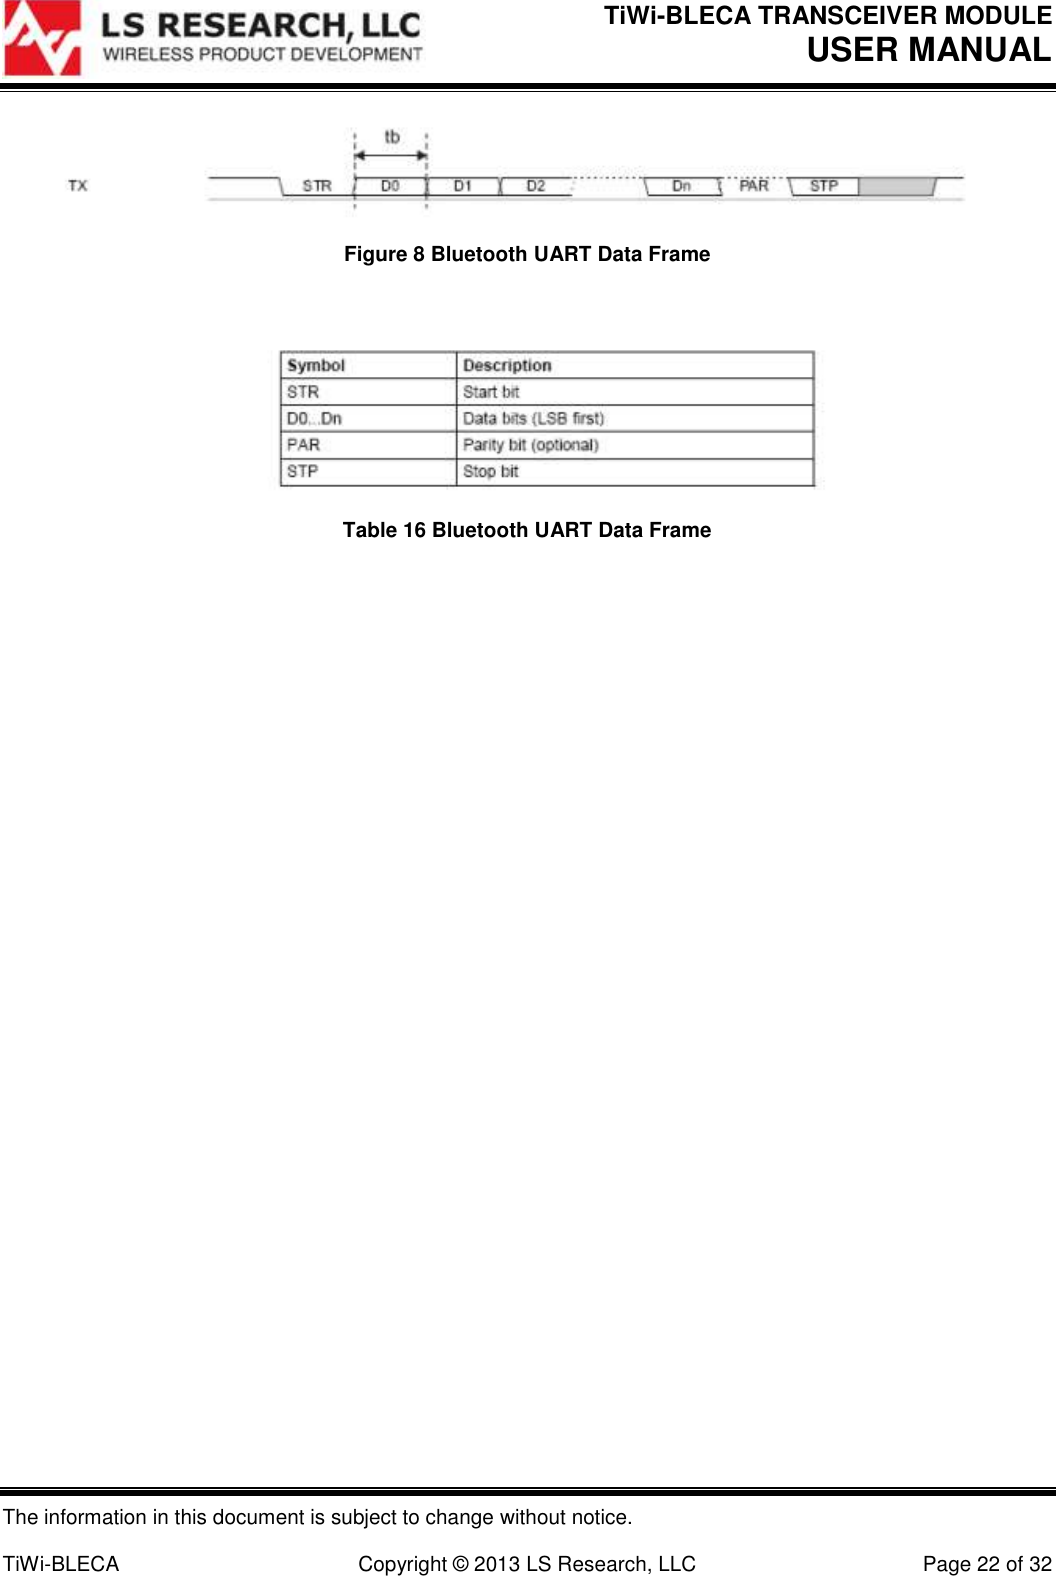 TiWi-BLECA TRANSCEIVER MODULE USER MANUAL   The information in this document is subject to change without notice.  TiWi-BLECA  Copyright © 2013 LS Research, LLC  Page 22 of 32  Figure 8 Bluetooth UART Data Frame   Table 16 Bluetooth UART Data Frame    